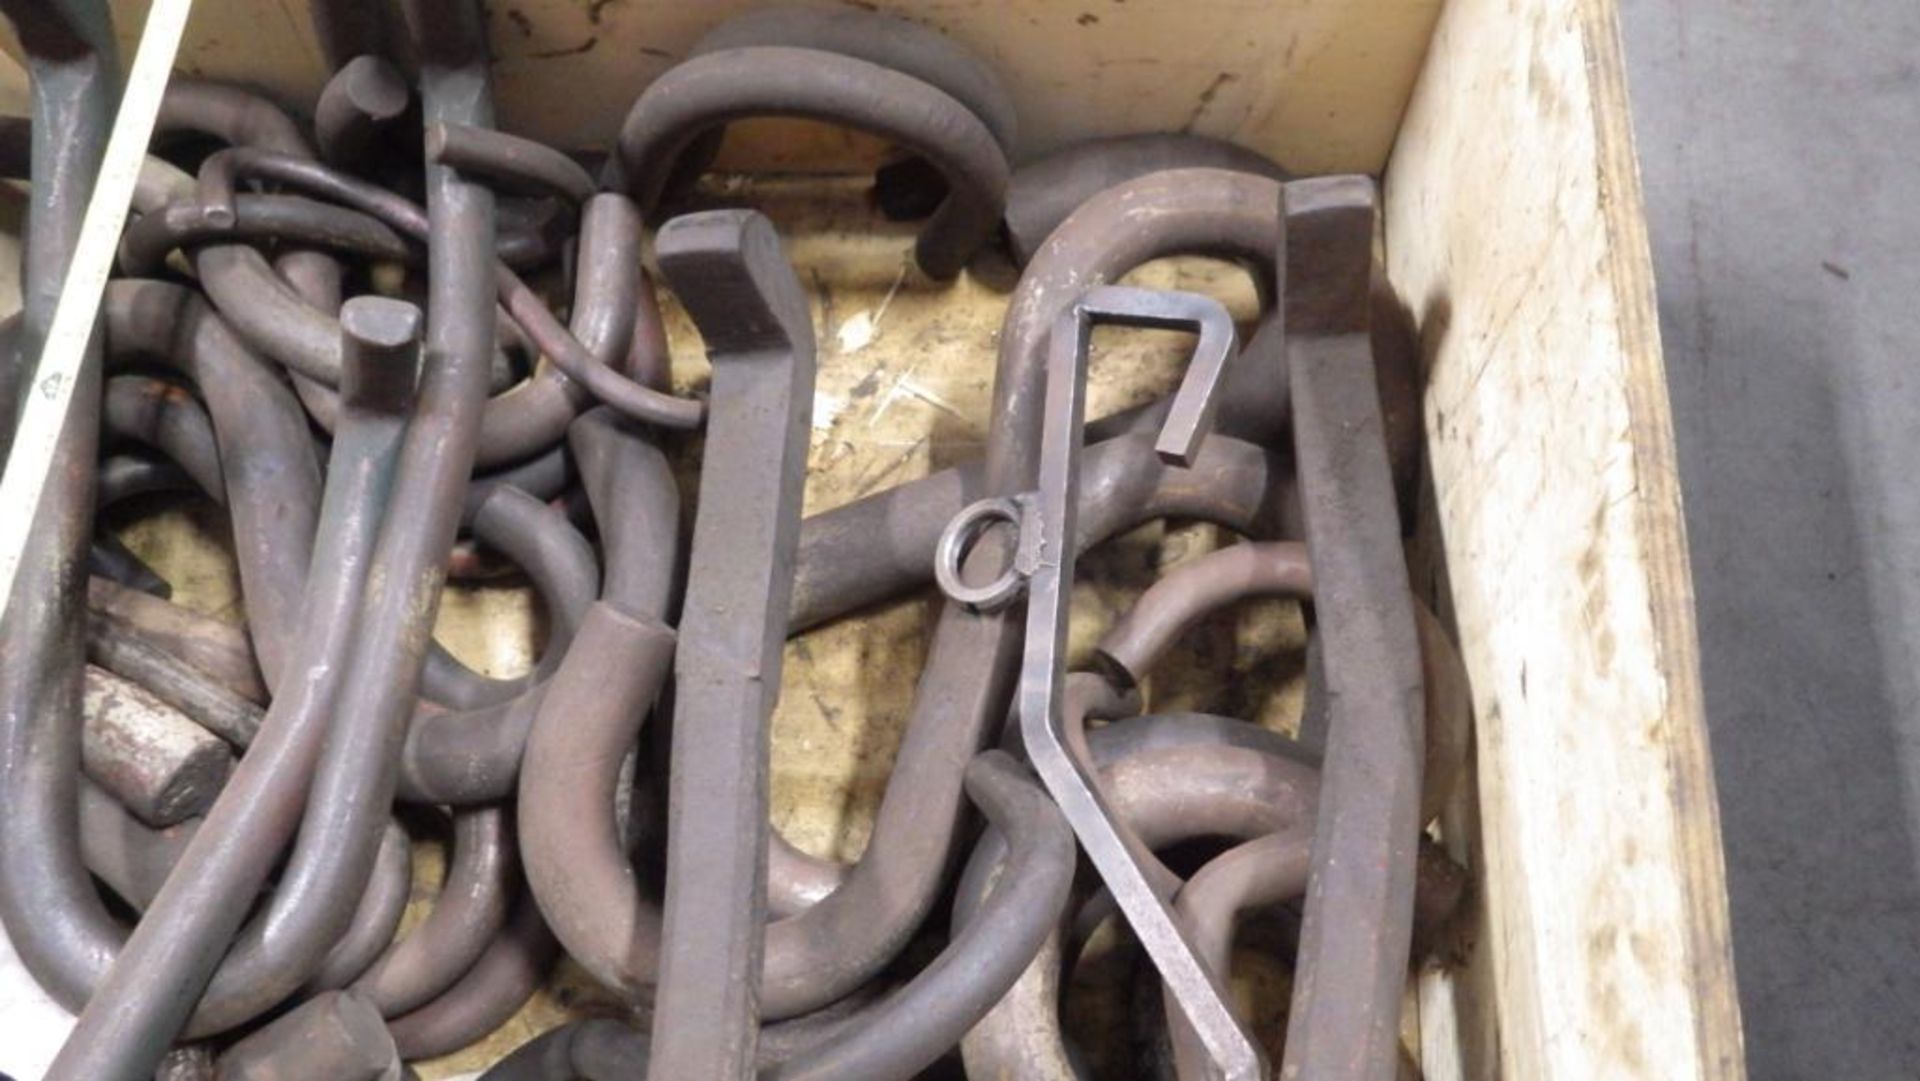 Lot c/o: Assorted Sized Large "S"-Hooks and Plate Hooks in ine box skid - Image 6 of 6